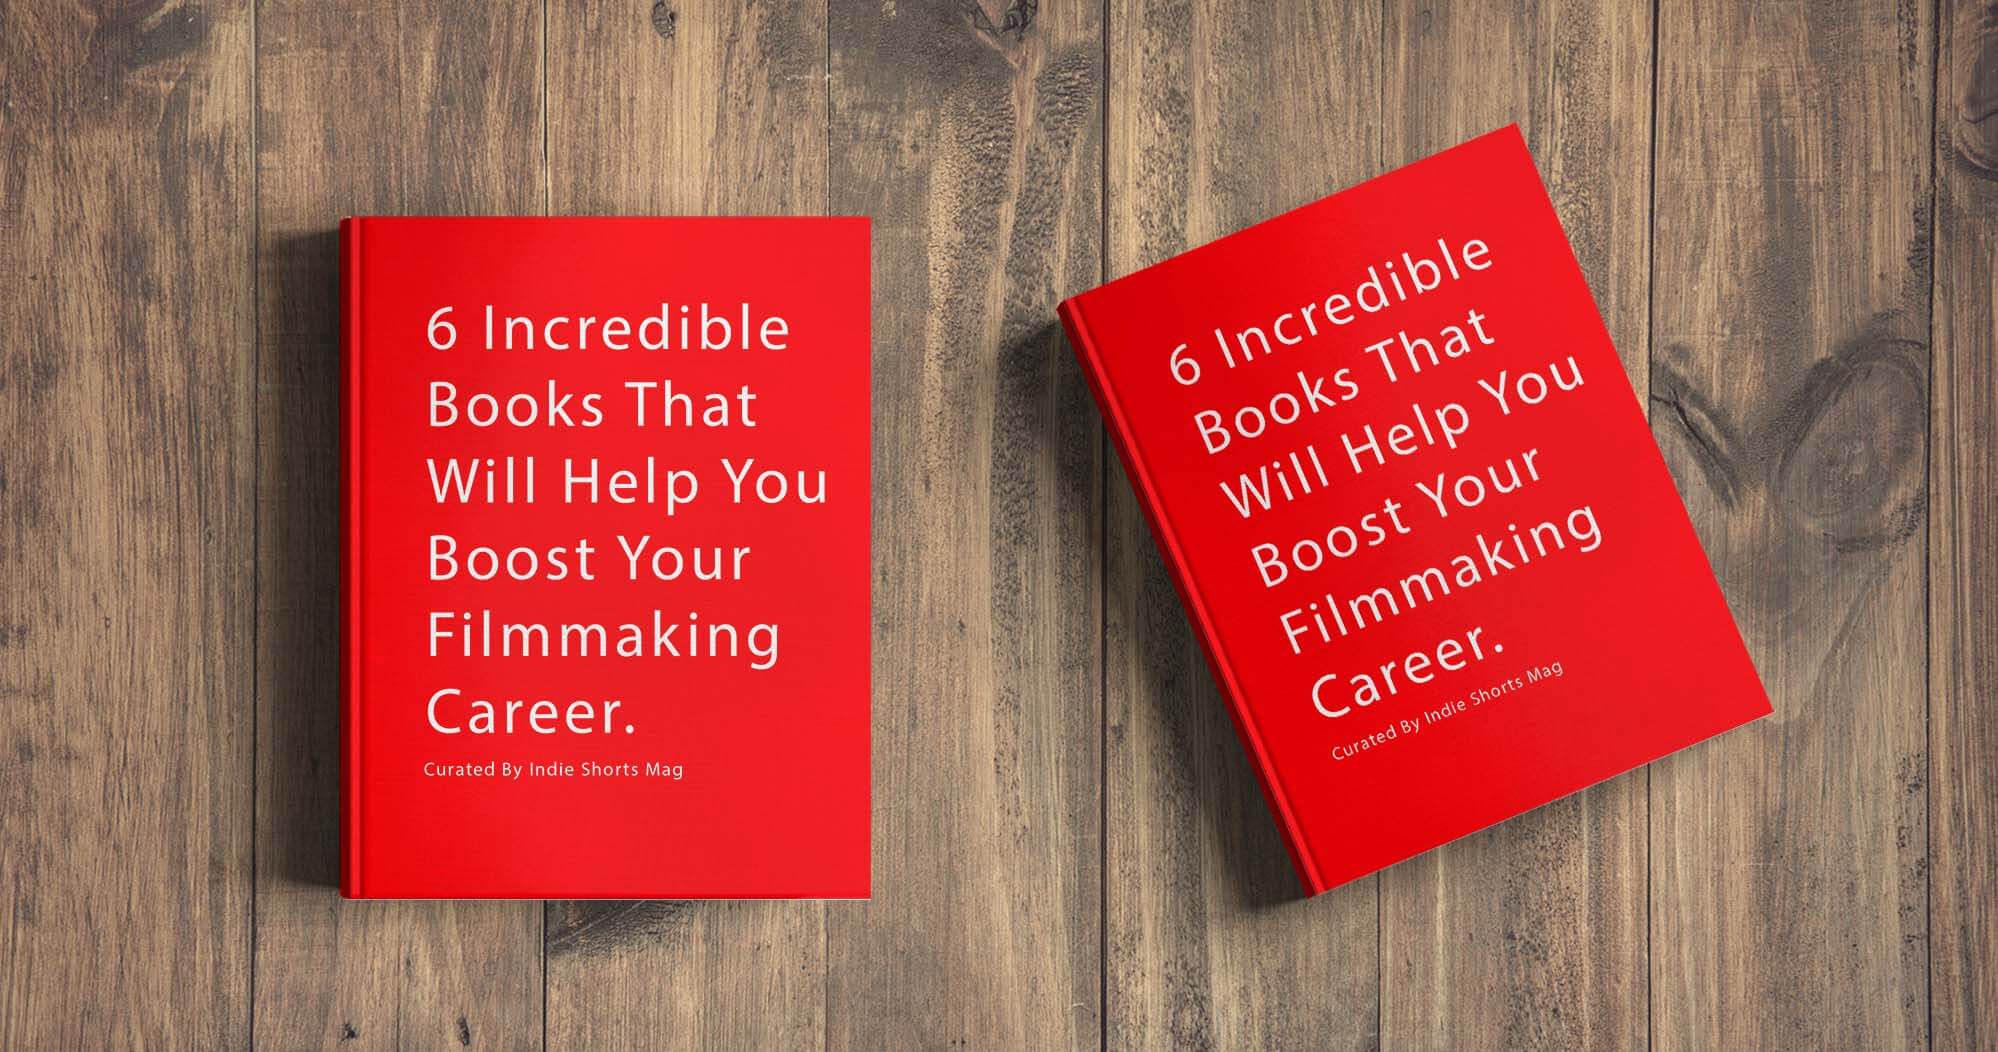 6 Awesome Books That Will Help You Boost Your Filmmaking Career - Indie Shorts Mag